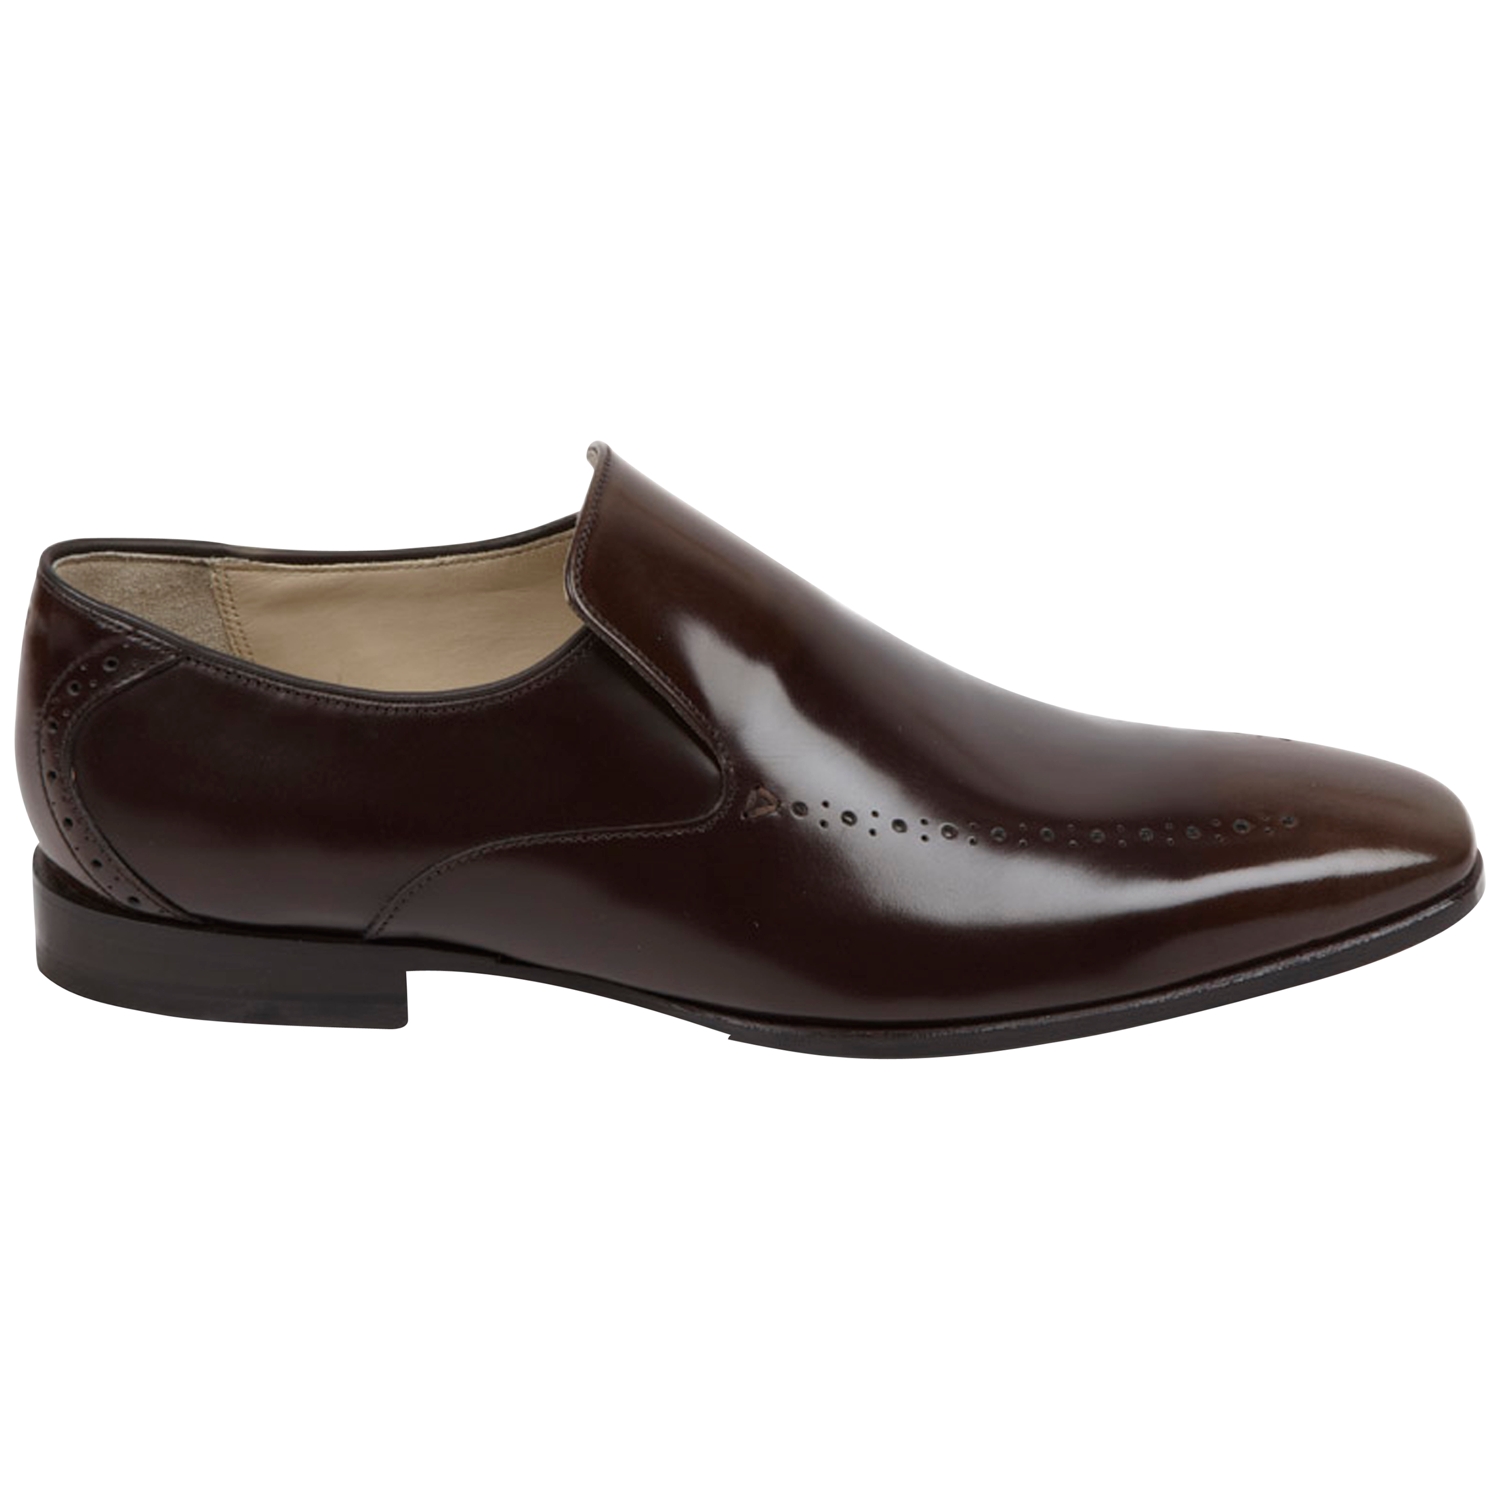 Oliver Sweeney Oliver Sweeney Pirie Leather Brogue Slip On Shoes Brown ...